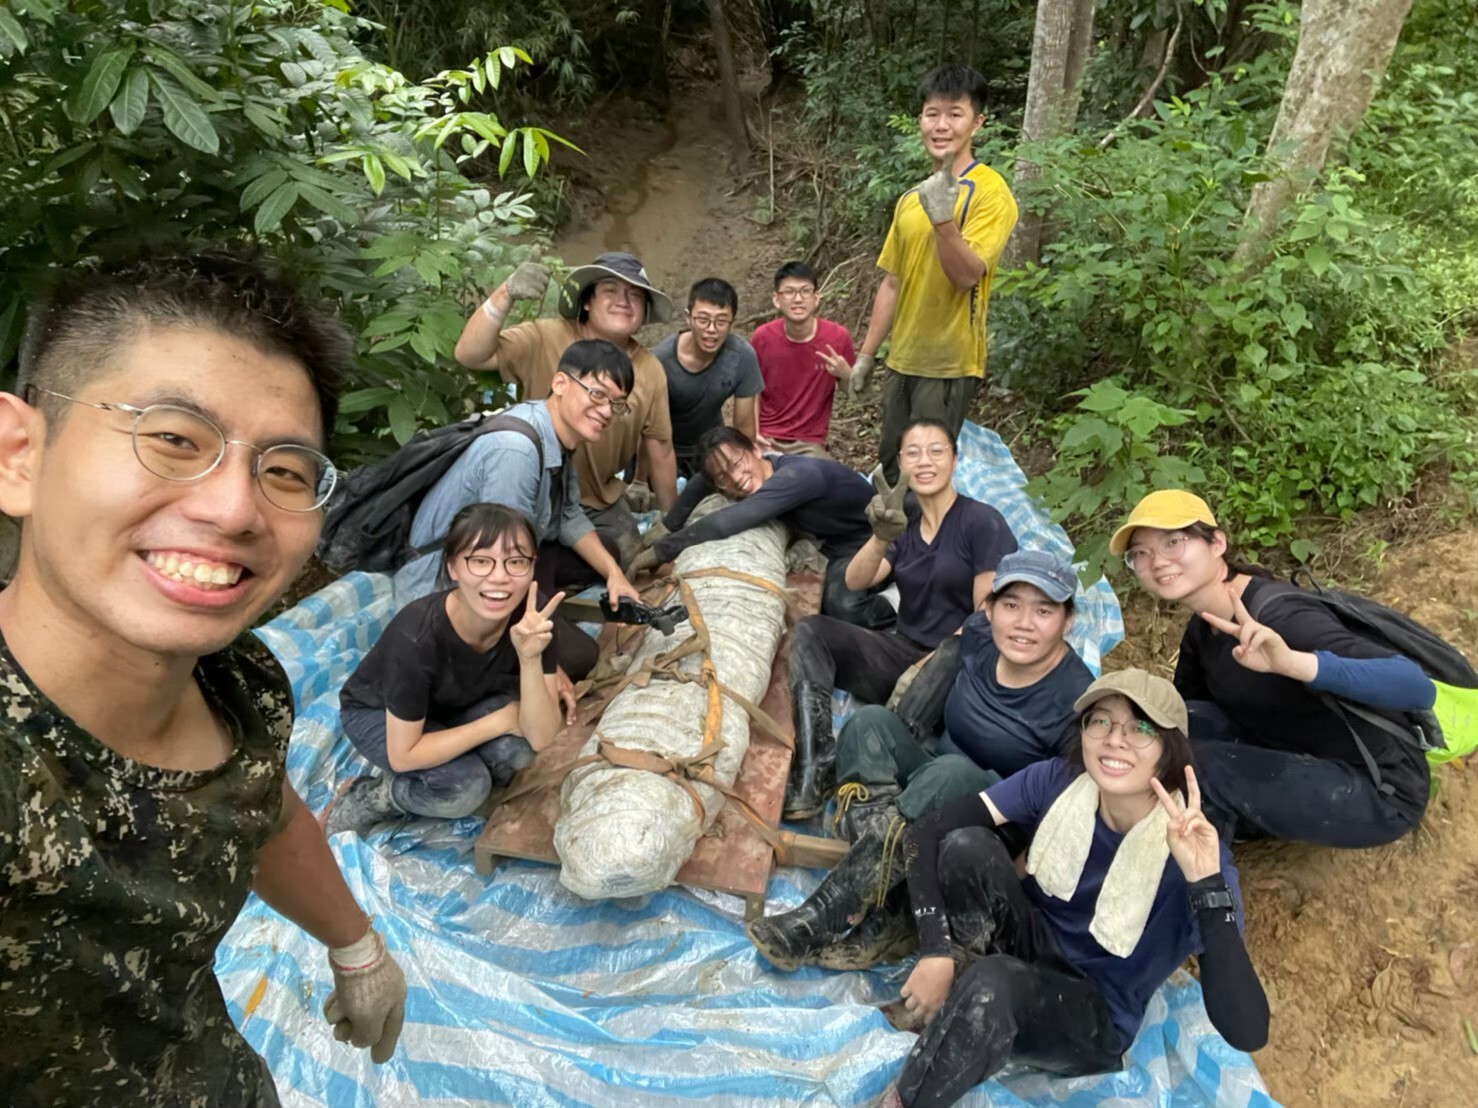 NCKU and NMNS, with scholars from Taiwan and abroad, discovered the most complete whale fossil in Taiwan’s history together.